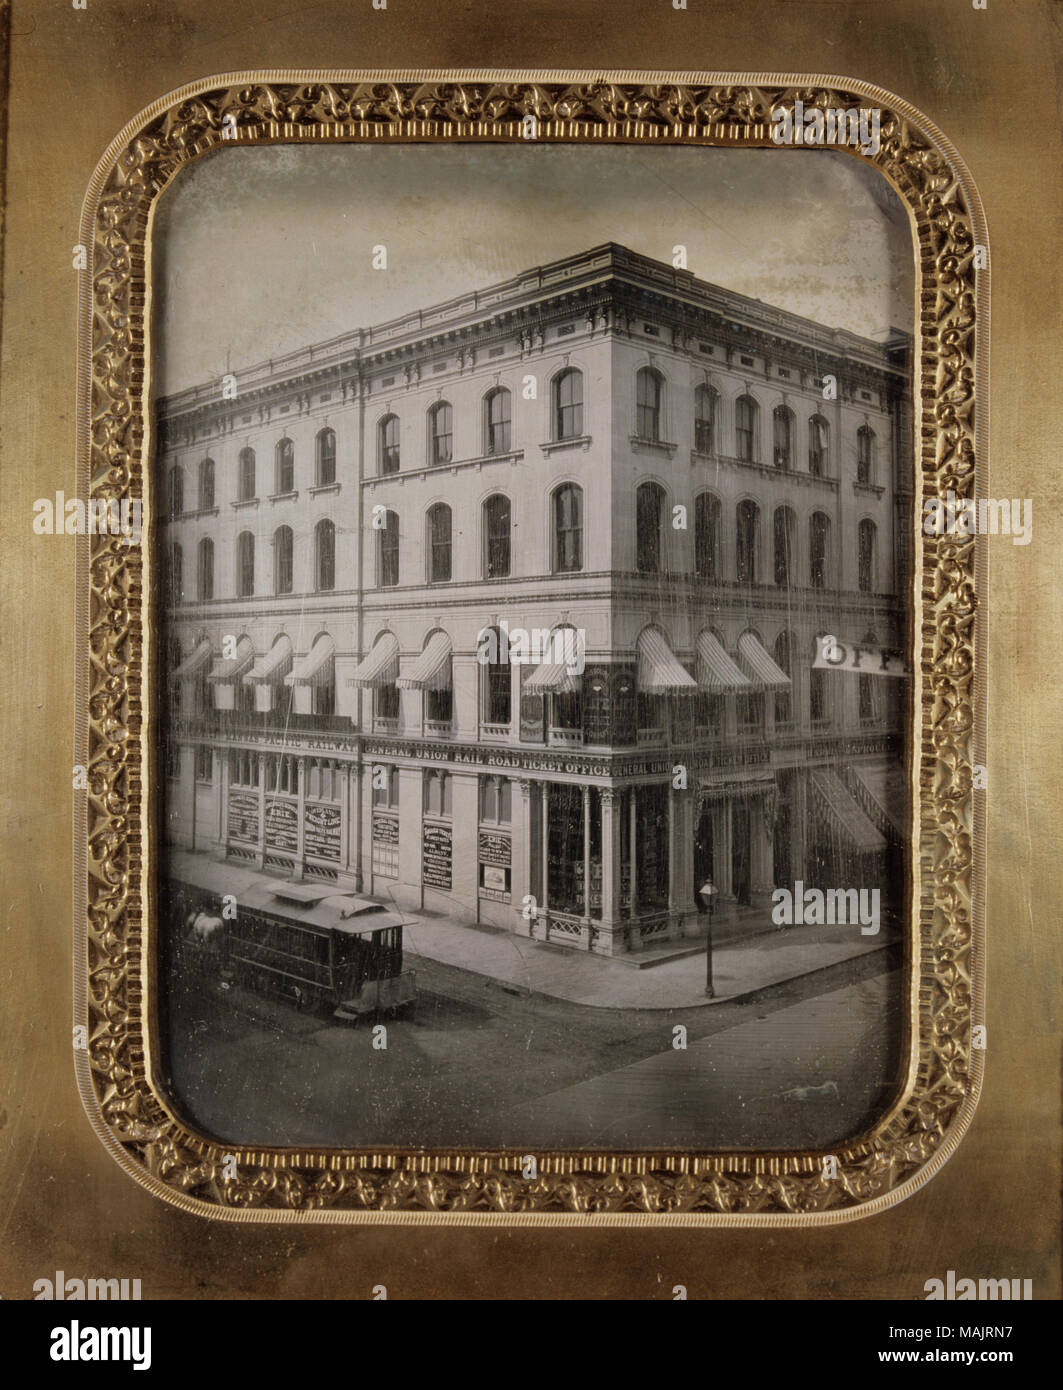 The Ann Lucas Hunt Building on the northwest corner of Fourth and Olive Streets. The architect for the building was Major Francis D. Lee. A streetlamps stands on the corner and a horse-drawn streetcar stands in the street in front of the structure. Signs on the second floor of the building read 'Missouri Mutual Life Insurance Company' and 'Office - St. Louis Fair Grounds'. On the first floor, a sign reads '... Pacific Despatch via Kansas Pacific Railway' and 'General Union Rail Road Ticket Office'. In the windows the following advertisements can be seen: 'Erie and Pacific Despatch via North Mi Stock Photo